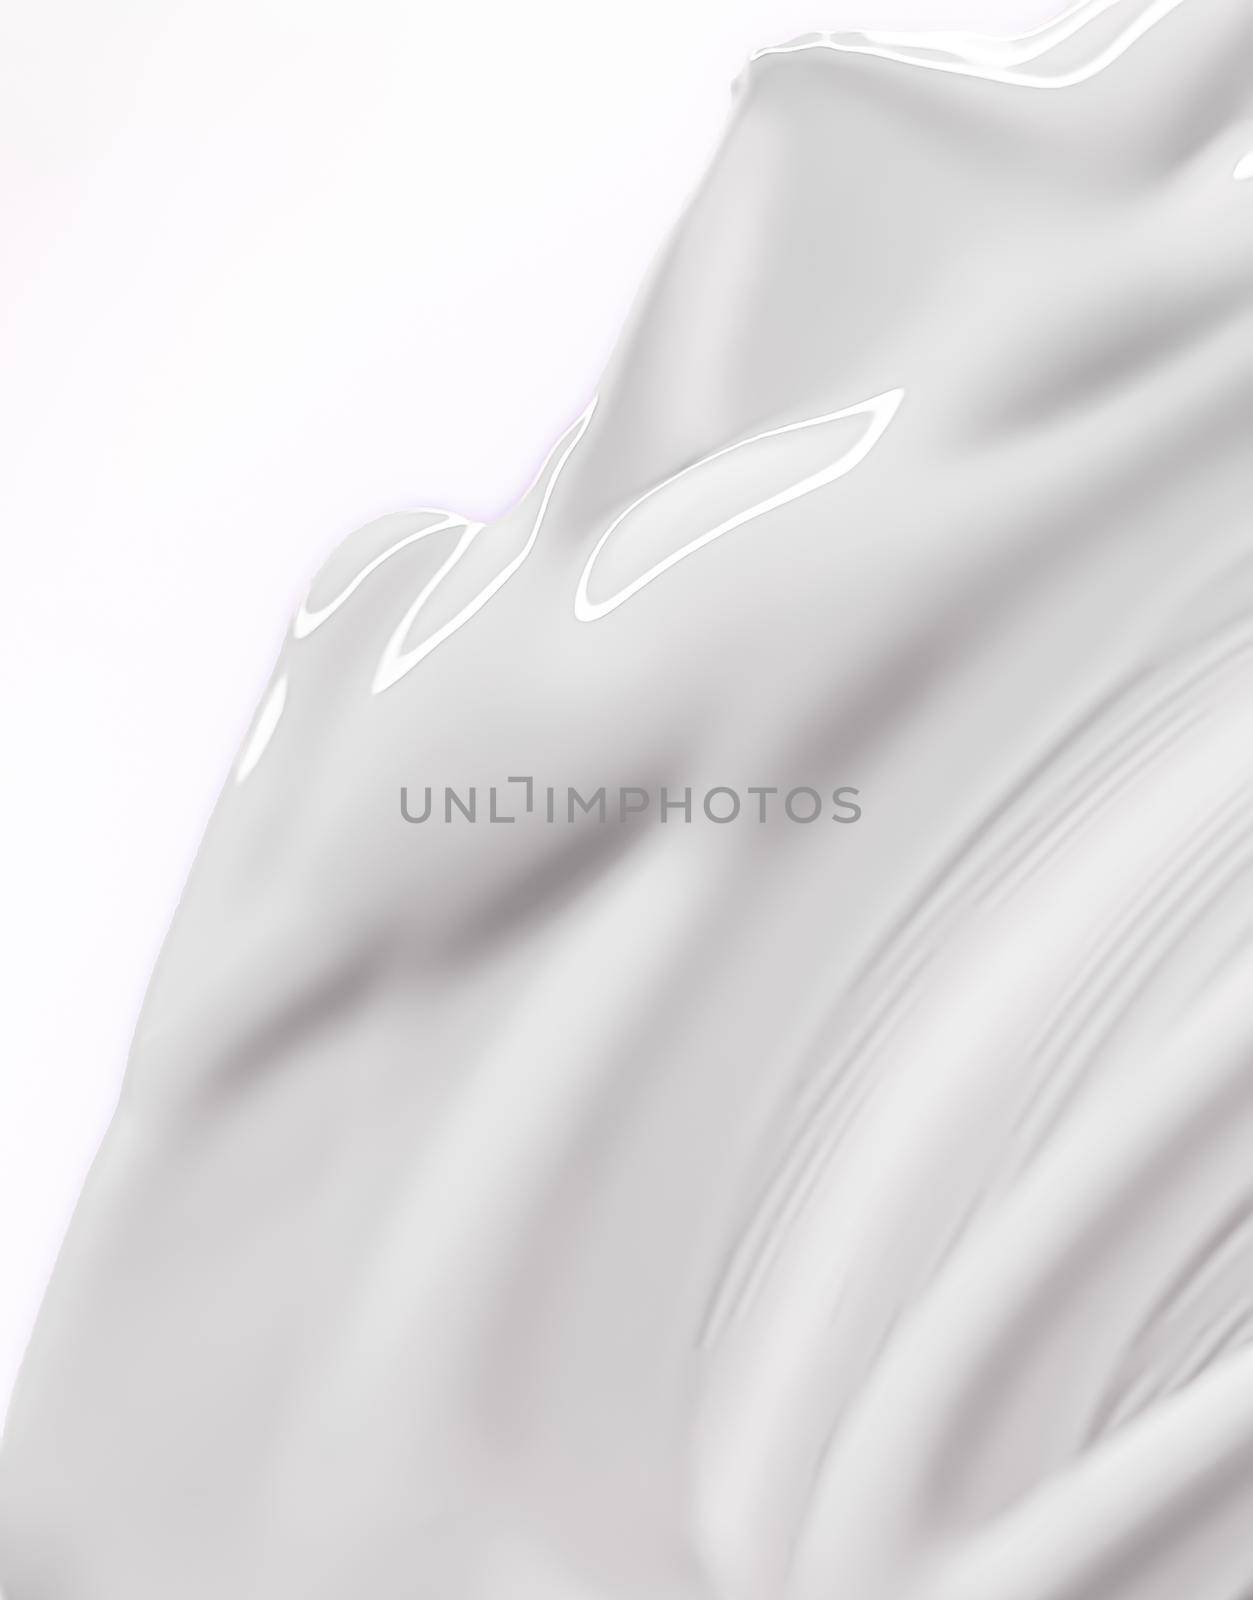 Glossy white cosmetic texture as beauty make-up product background, cosmetics and luxury makeup brand design by Anneleven